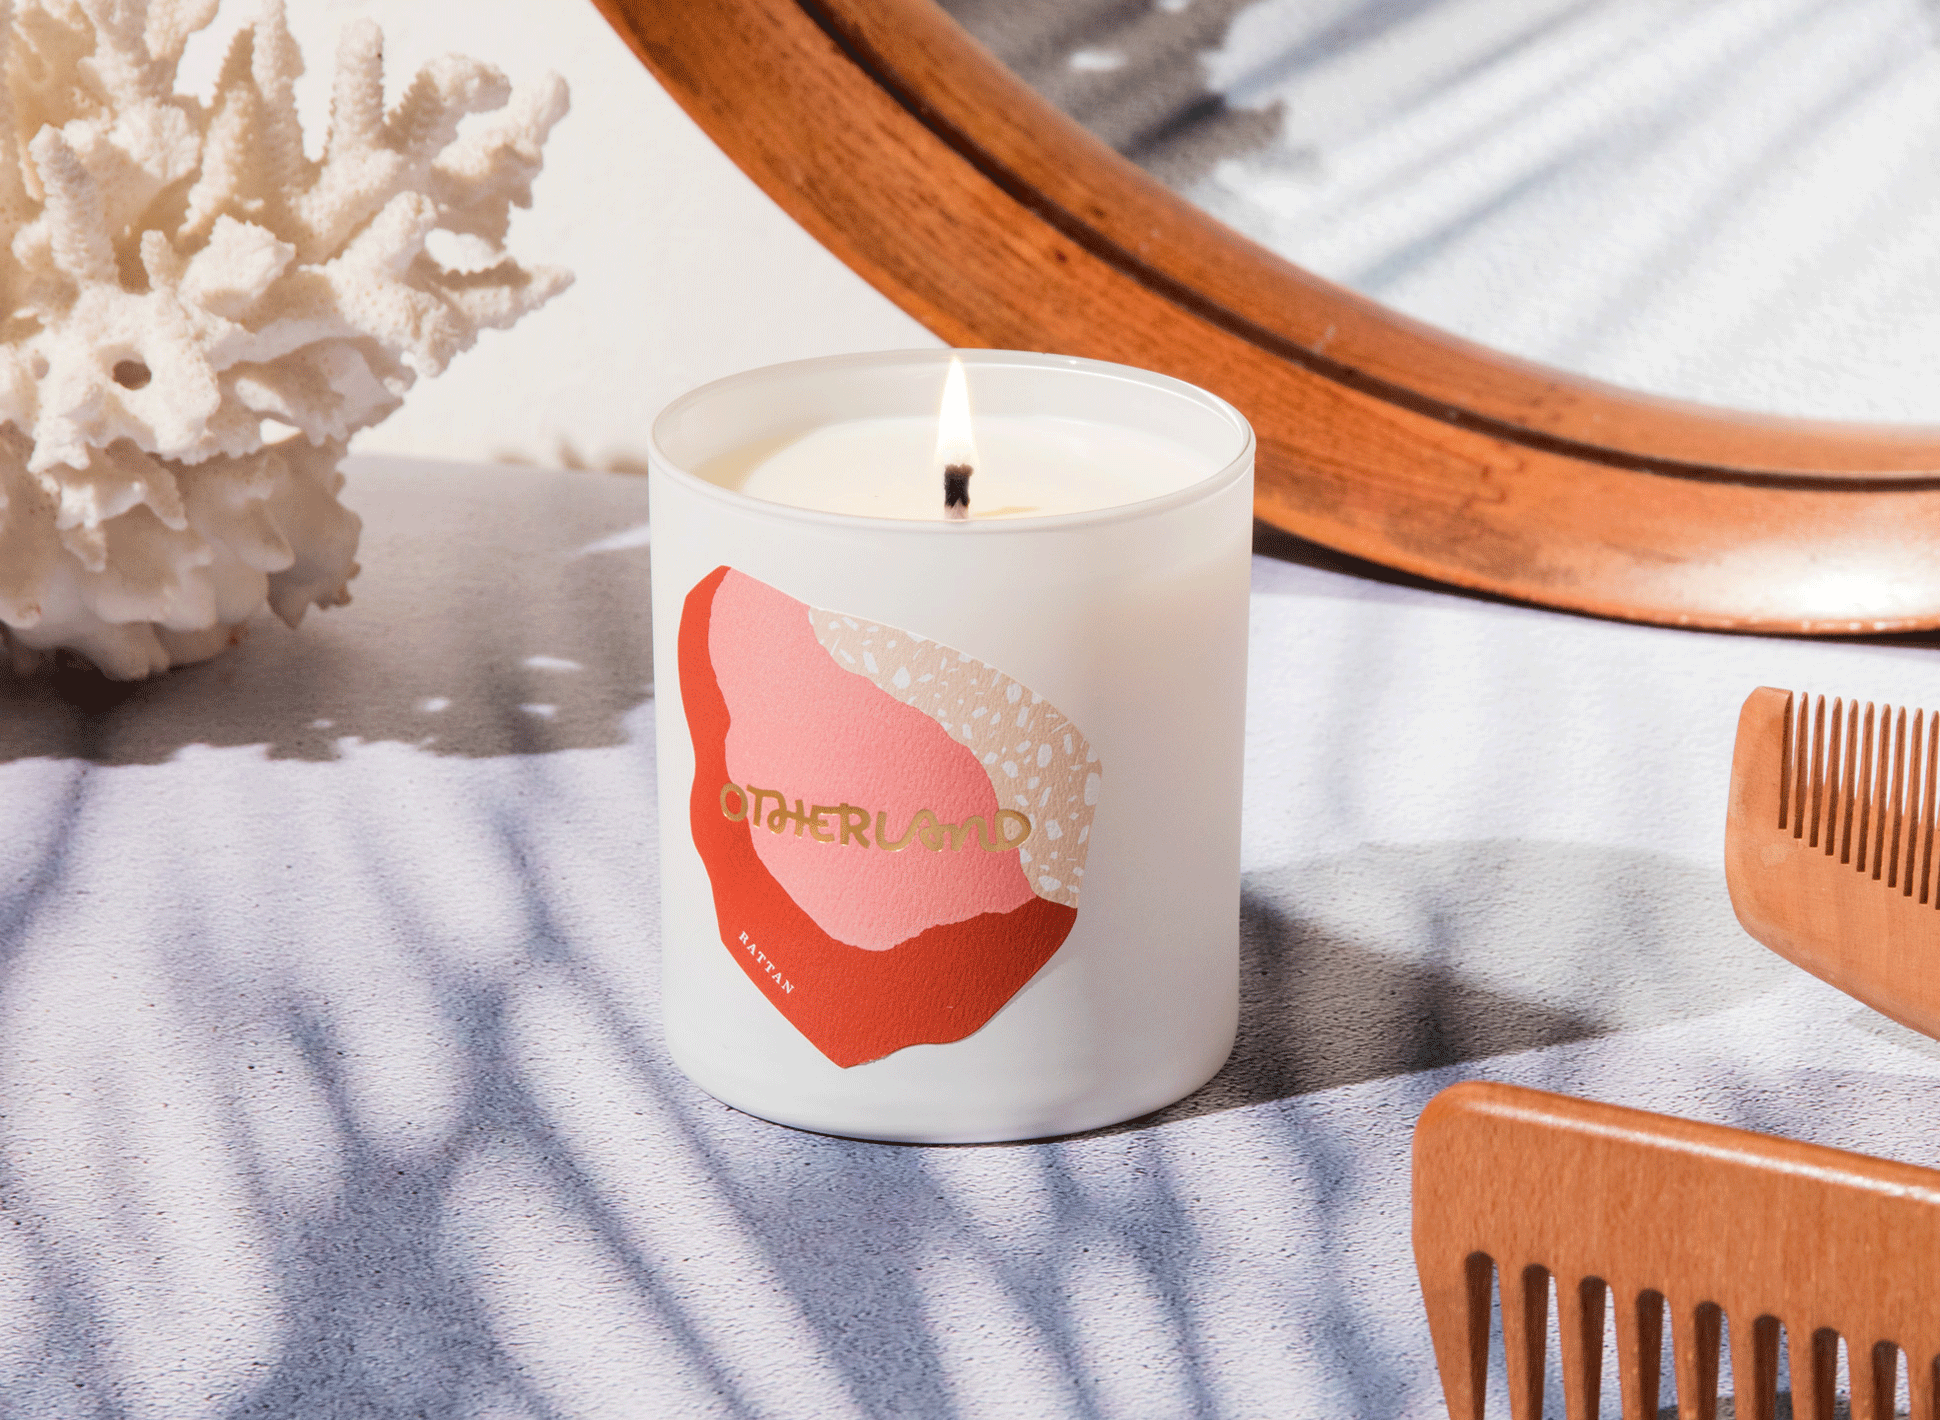 Rattan candle by Otherland